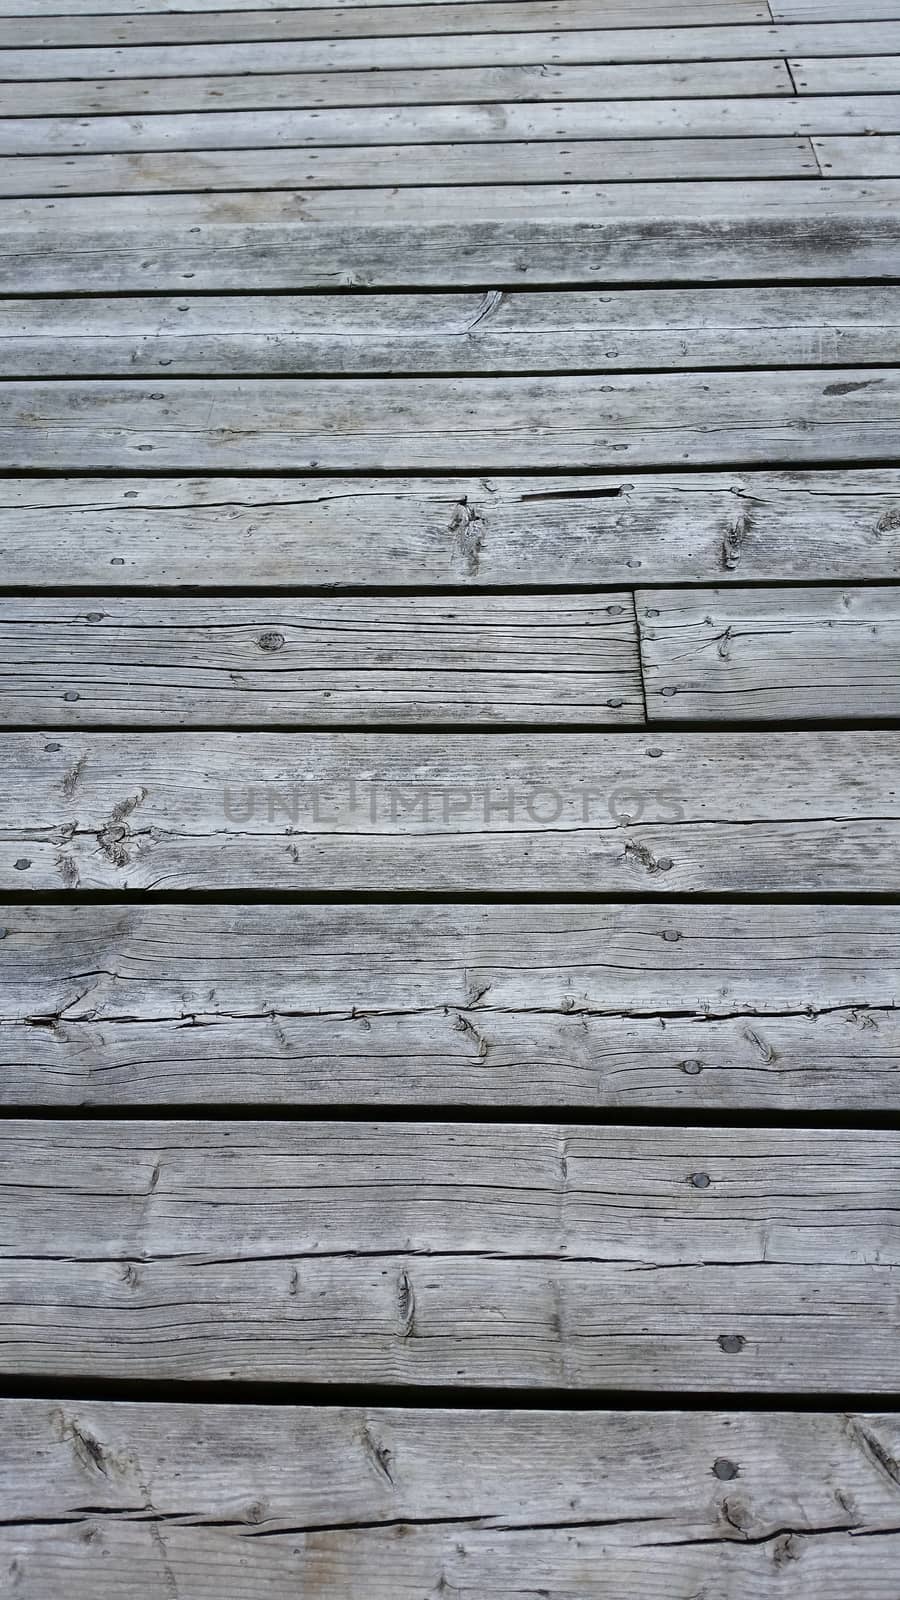 Silvery worn wood planks run horizonally as a background with character. Top planks recede into distance.